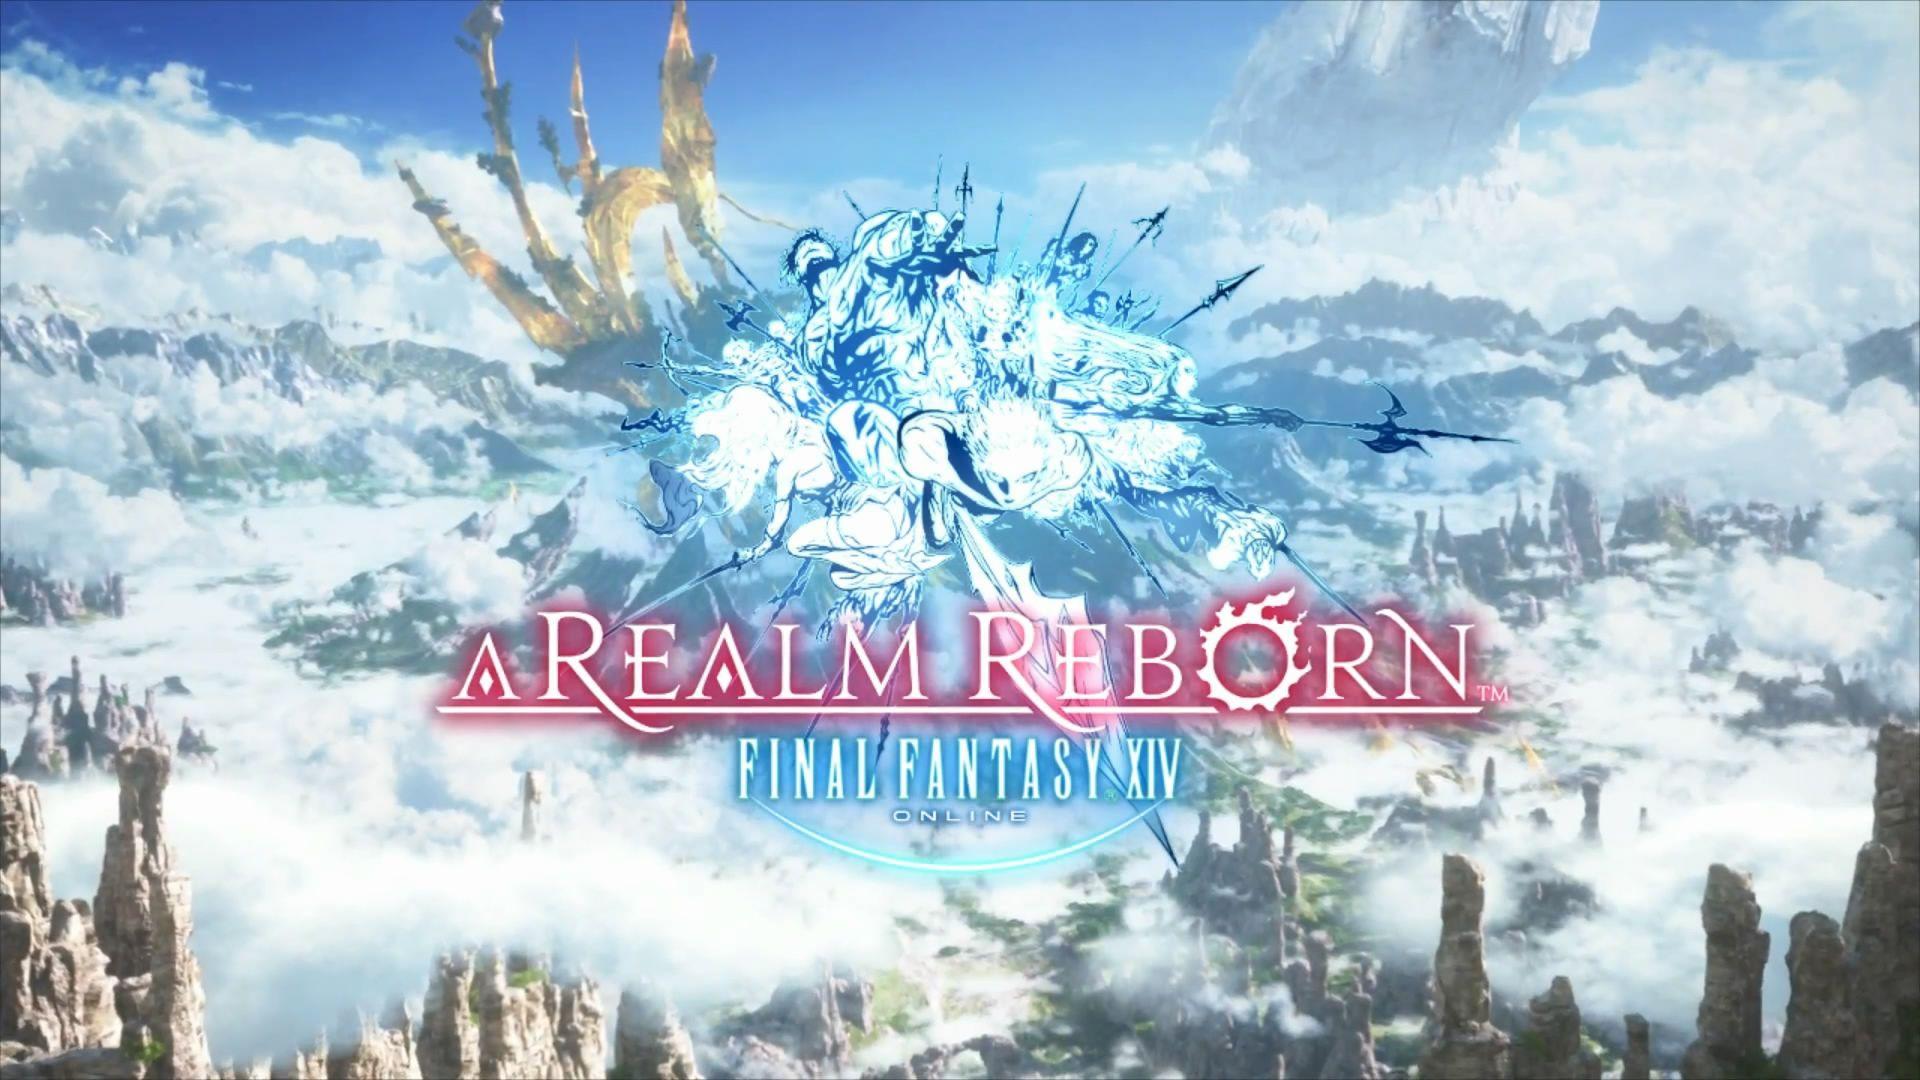 Final Fantasy XIV A Realm Reborn Impressions: Levels 1 To 10 In Beta